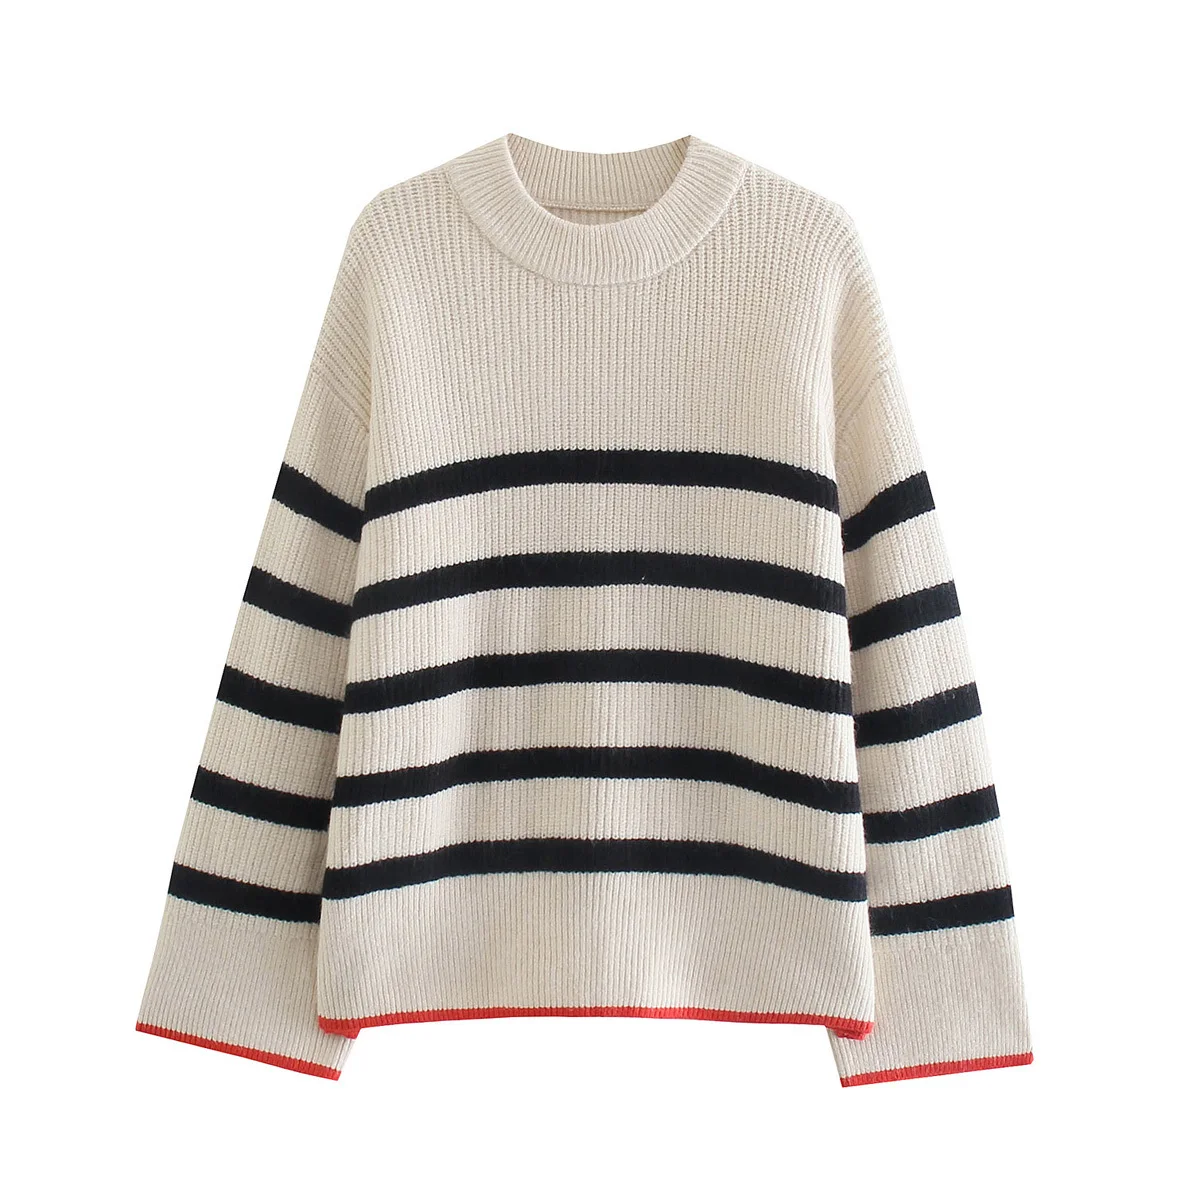 New-Women-Fashion-Striped-Knit-Sweater-Round-Neck-Long-Sleeves-Chic ...